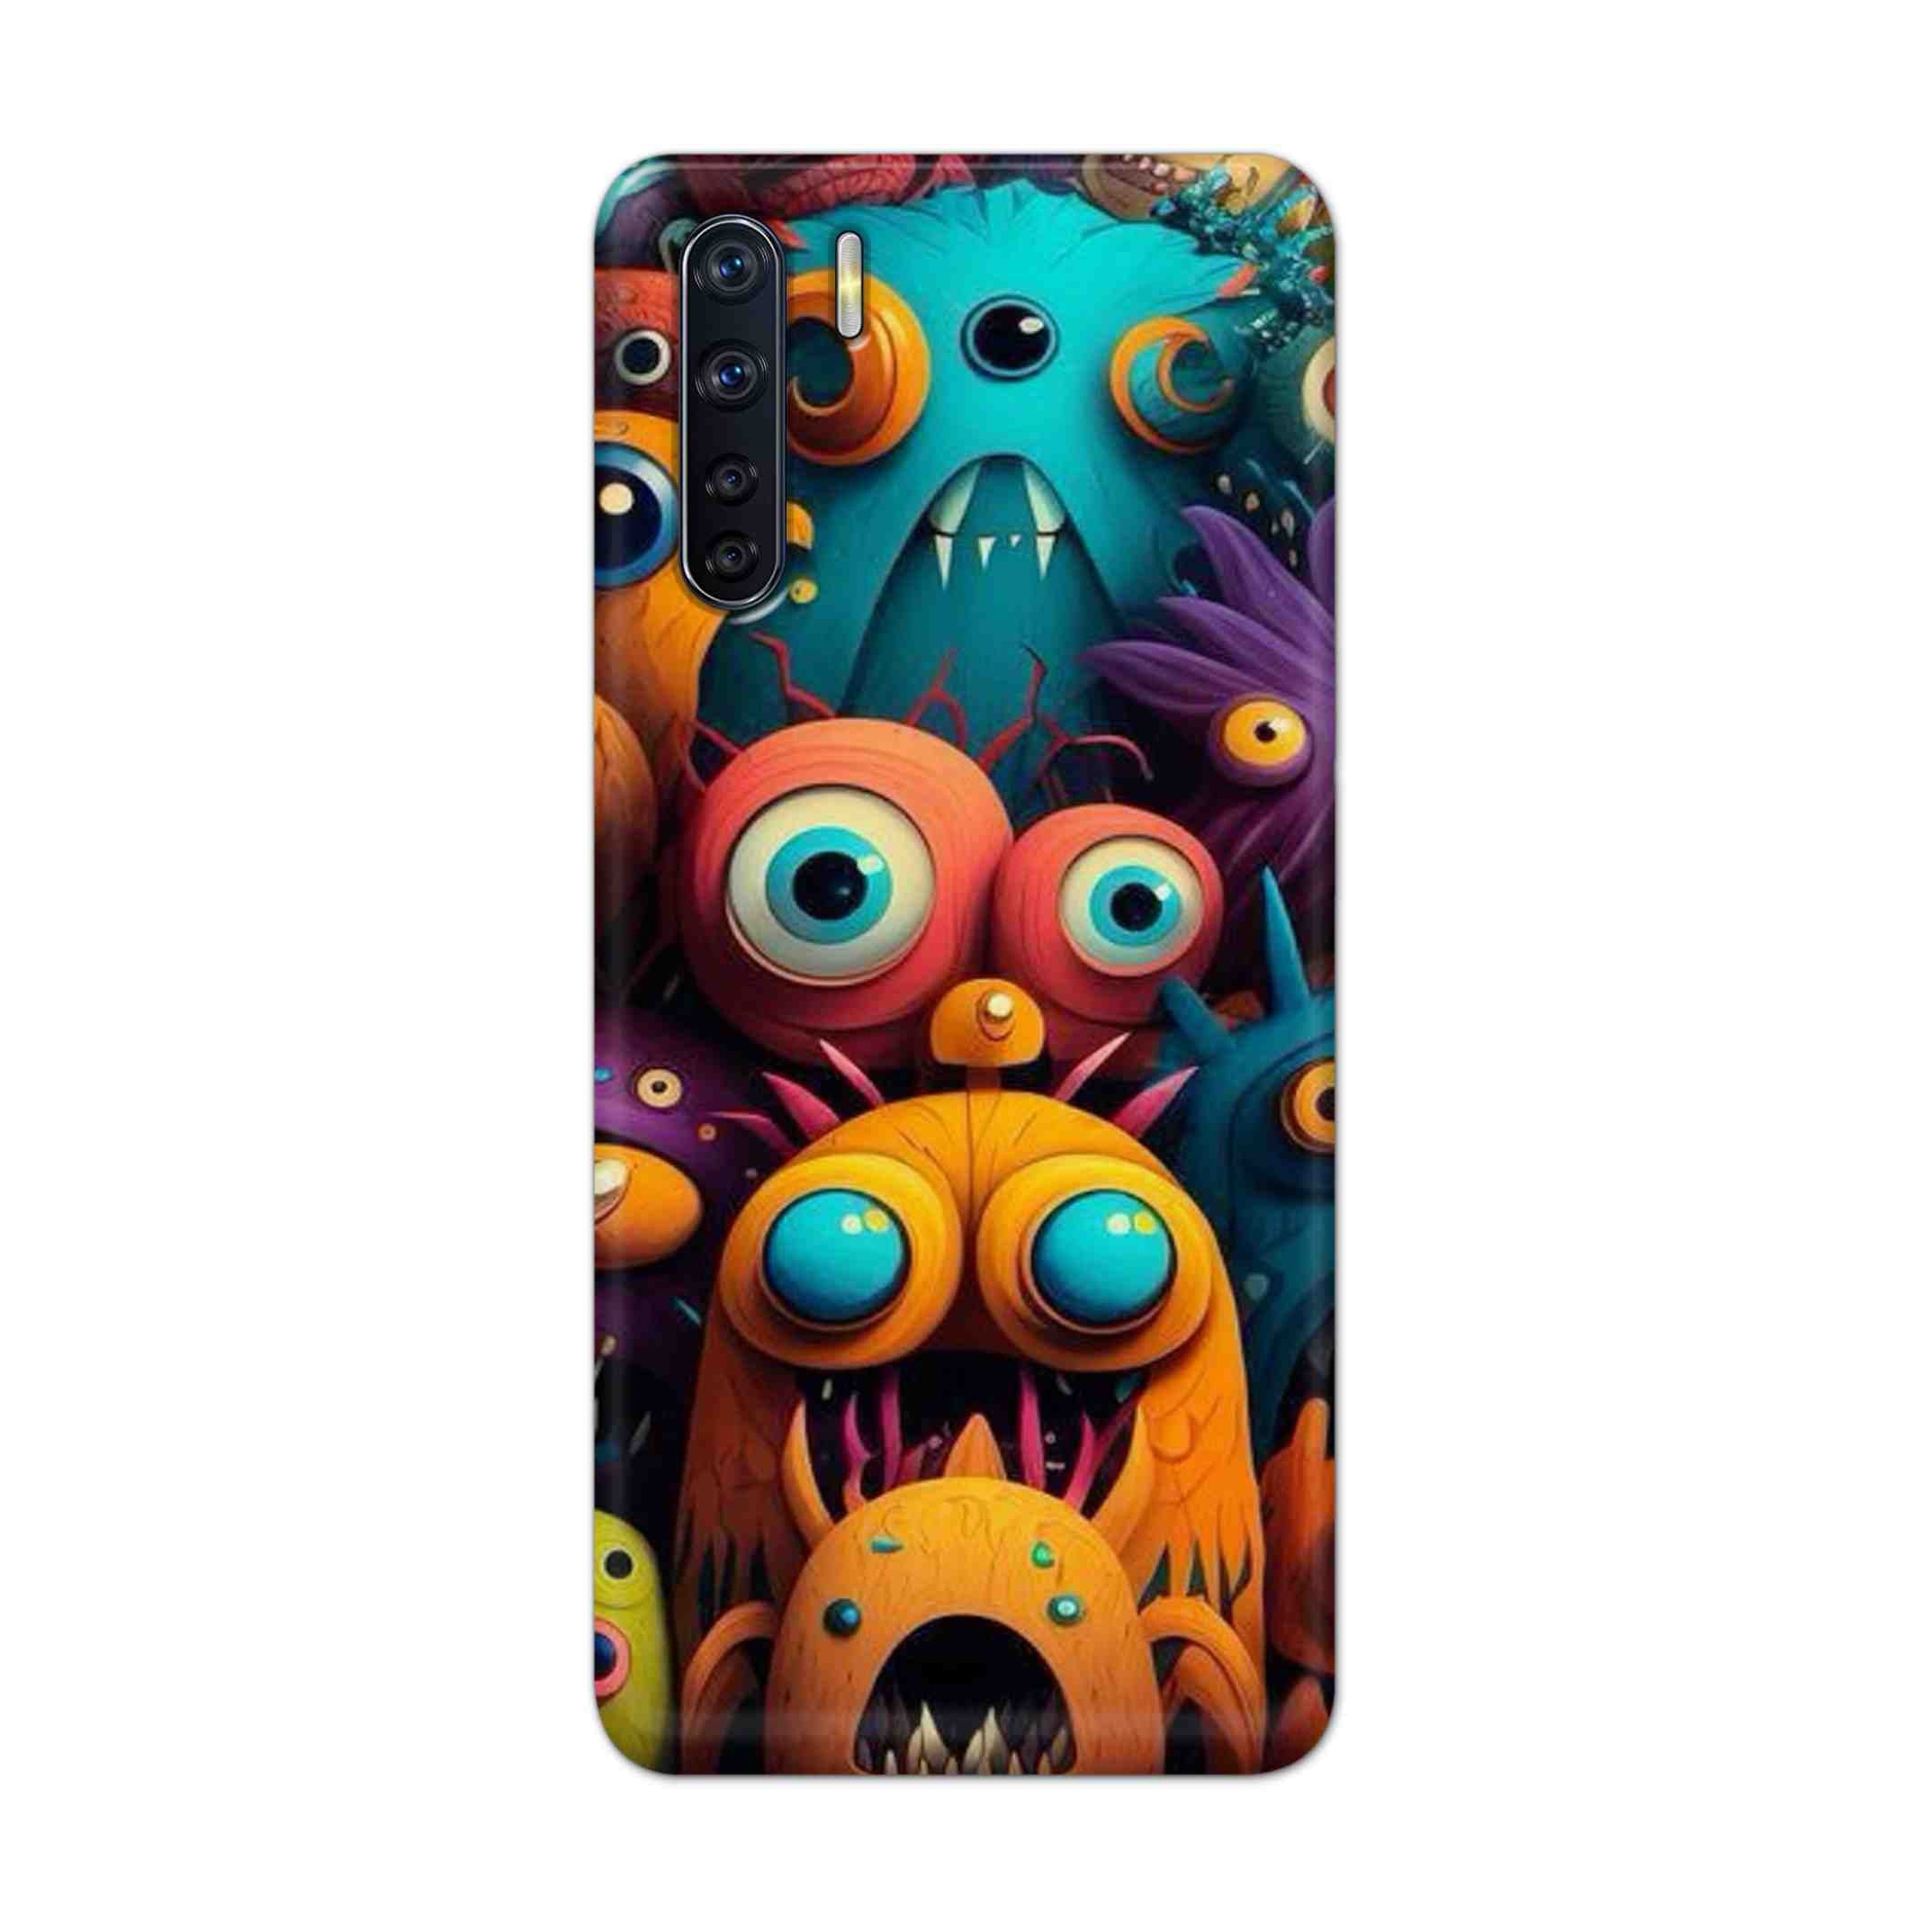 Buy Zombie Hard Back Mobile Phone Case Cover For OPPO F15 Online